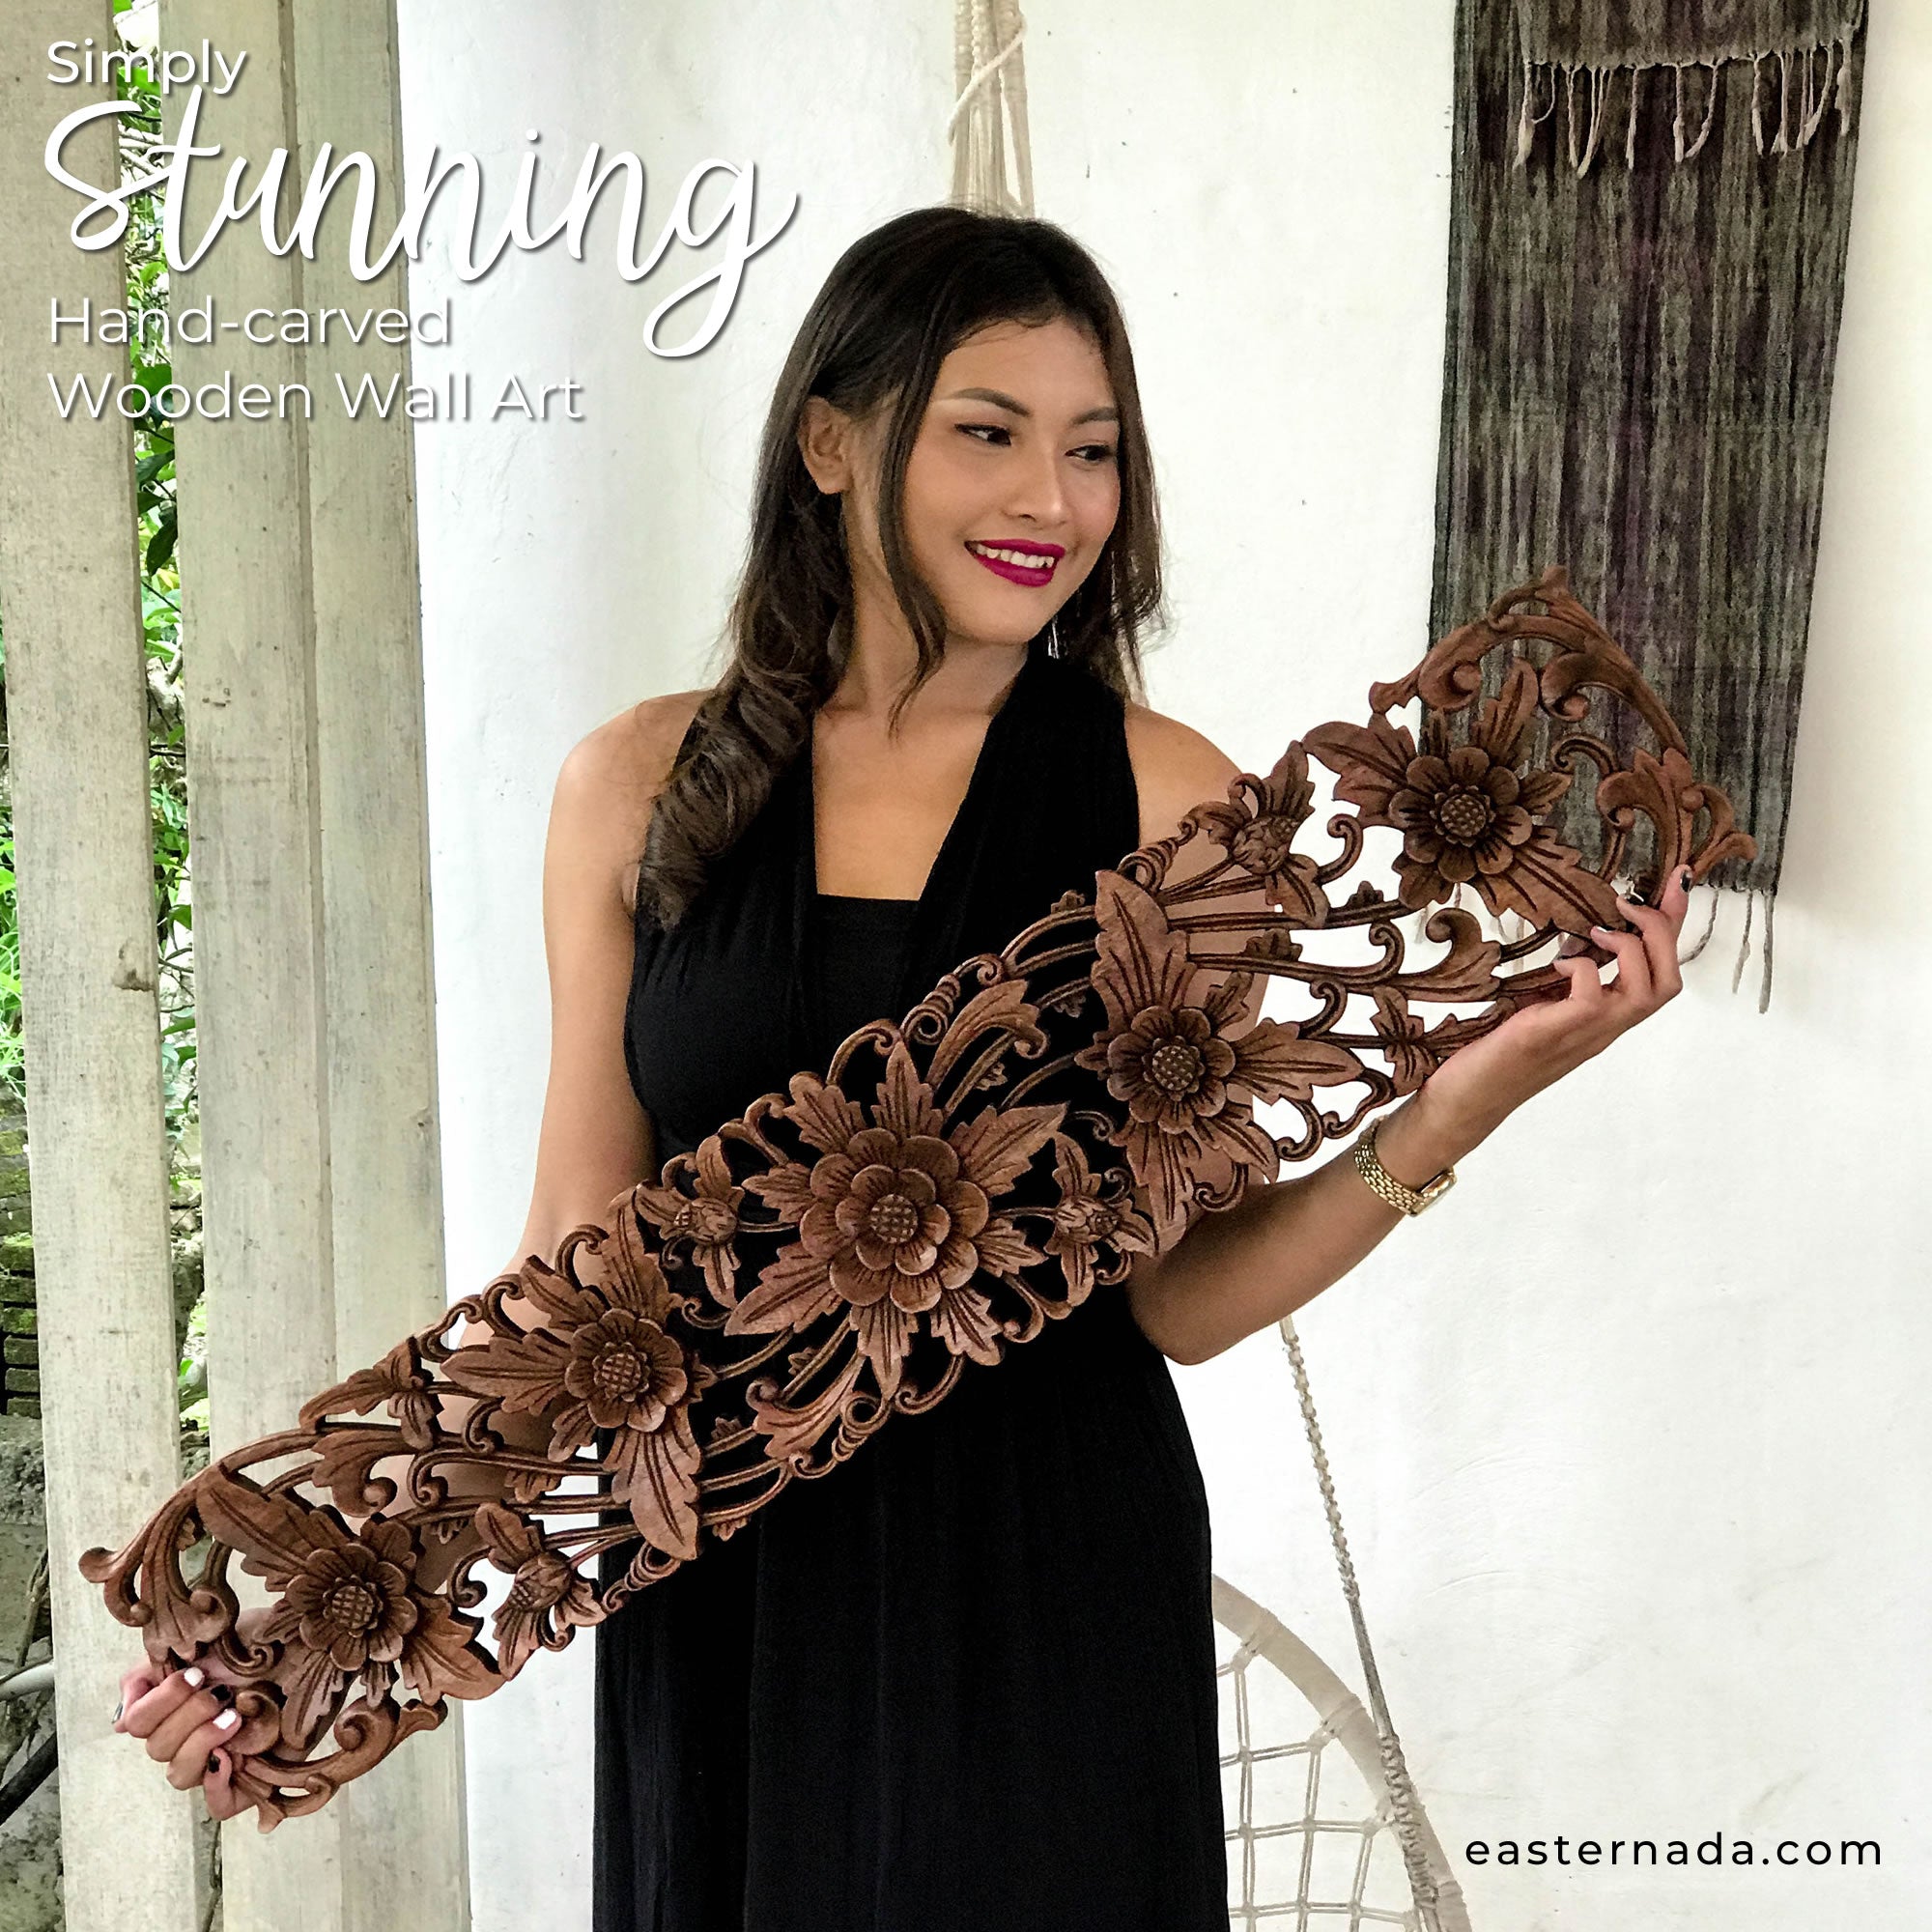 Hand-carved decorative wooden wall art sculptures | Unique and rare antique style hangings and gifts | Bohemian Boho Headboards -Easternada